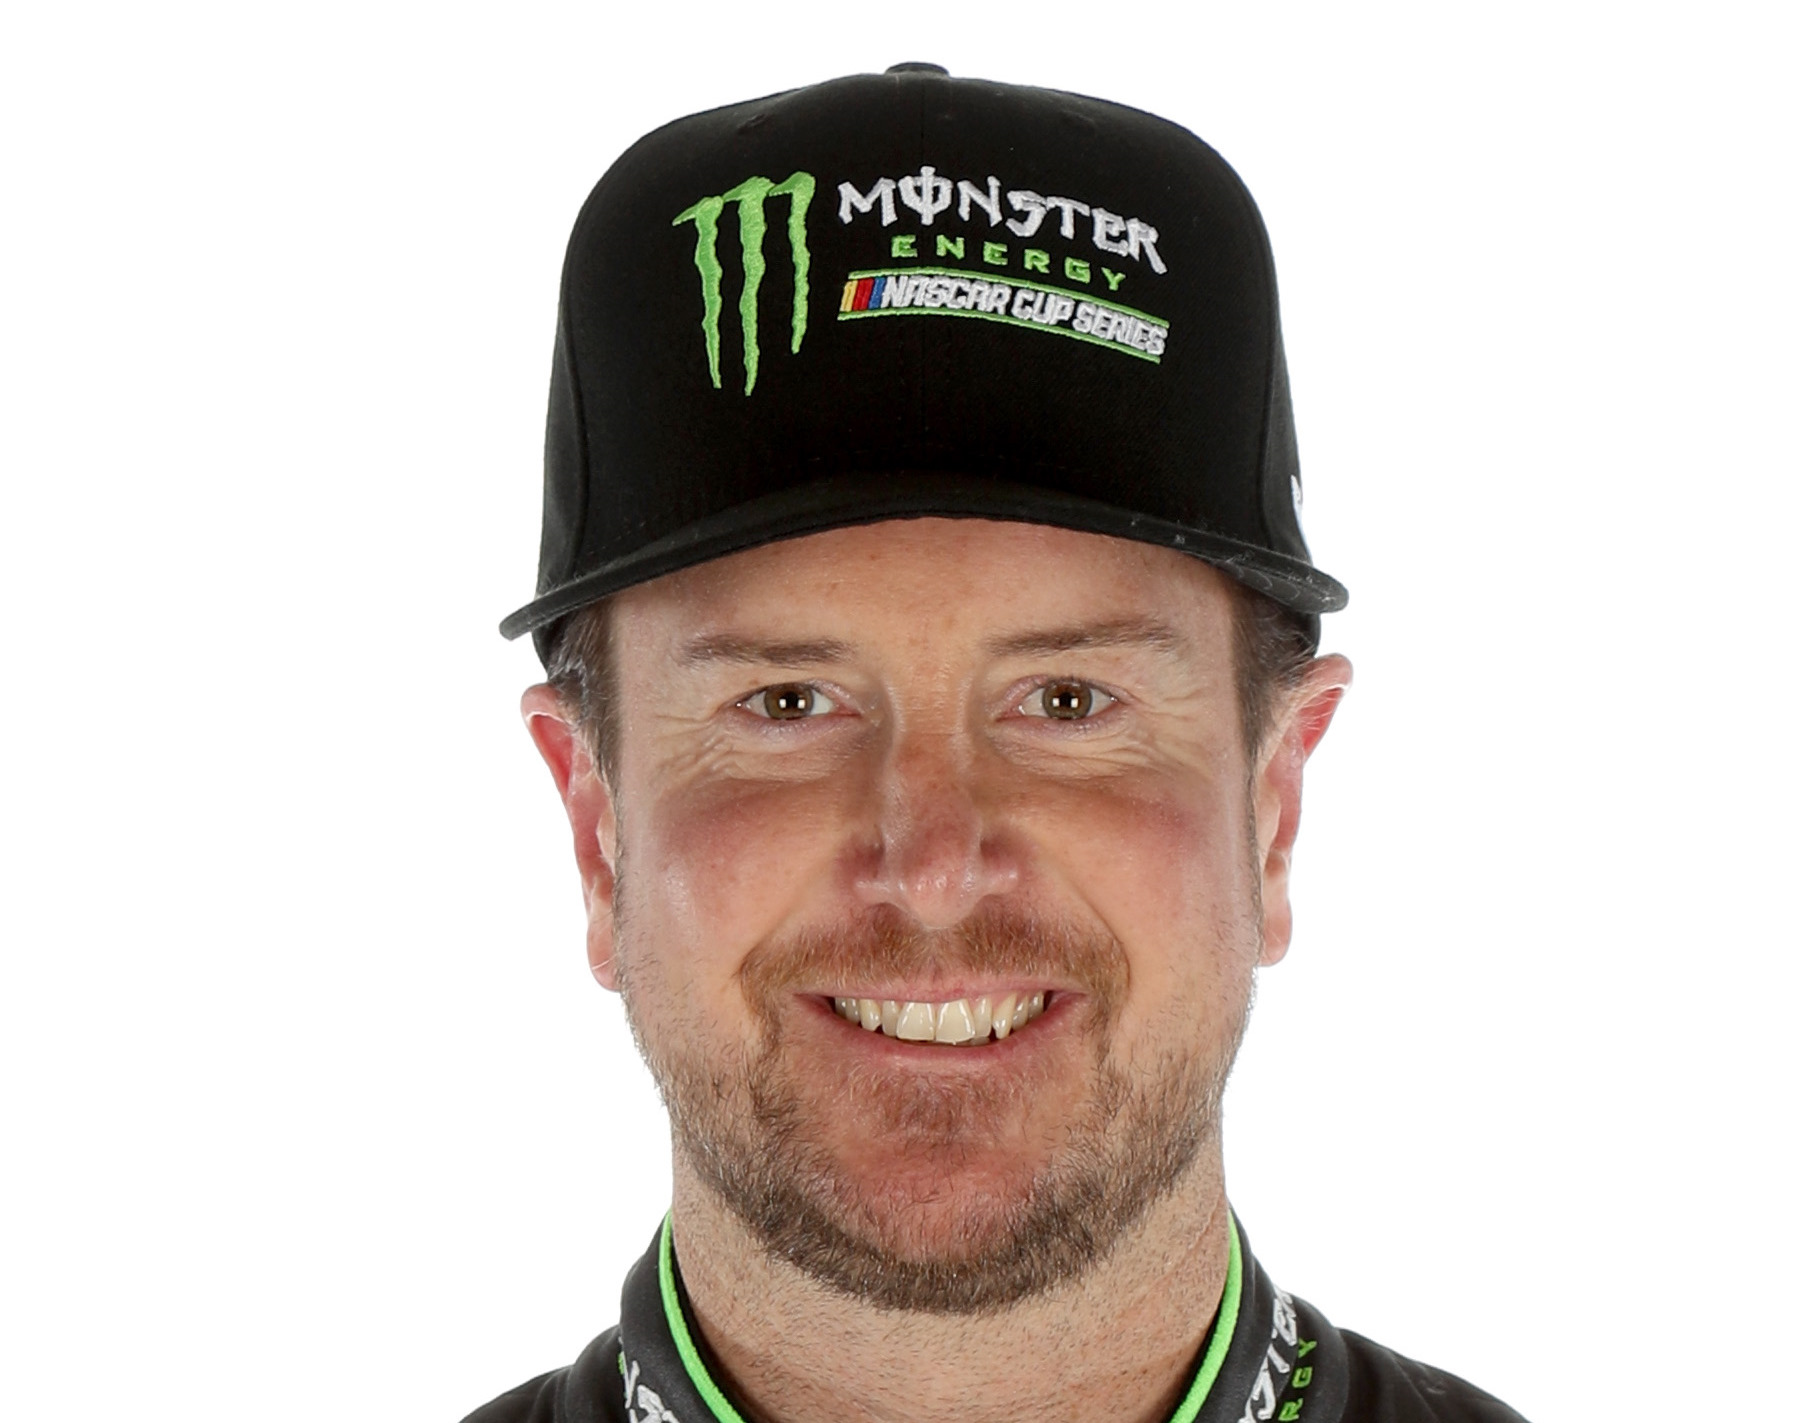 Kurt Busch - no sponsor, no ride. Even NASCAR is beginning to see the effects of falling TV ratings on NBCSN